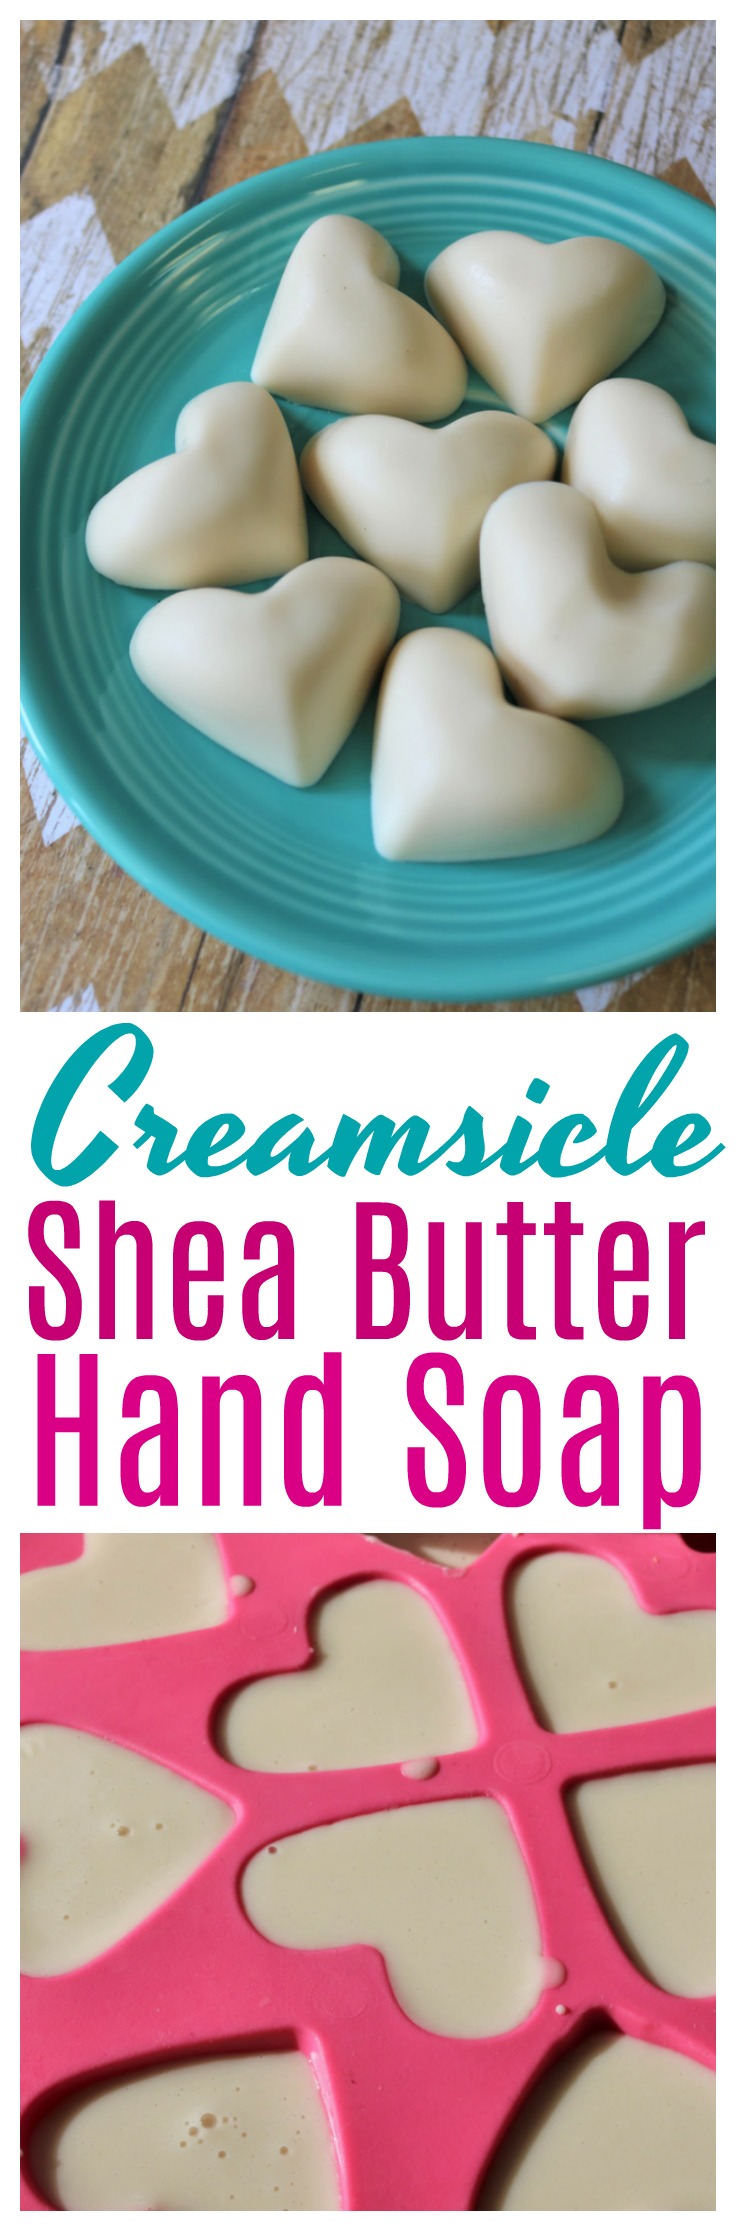 These fragrant creamsicle shea butter hand soaps are incredibly easy to make and beautiful to give as gifts to family or friends! #gift #DIY #essentialoil 